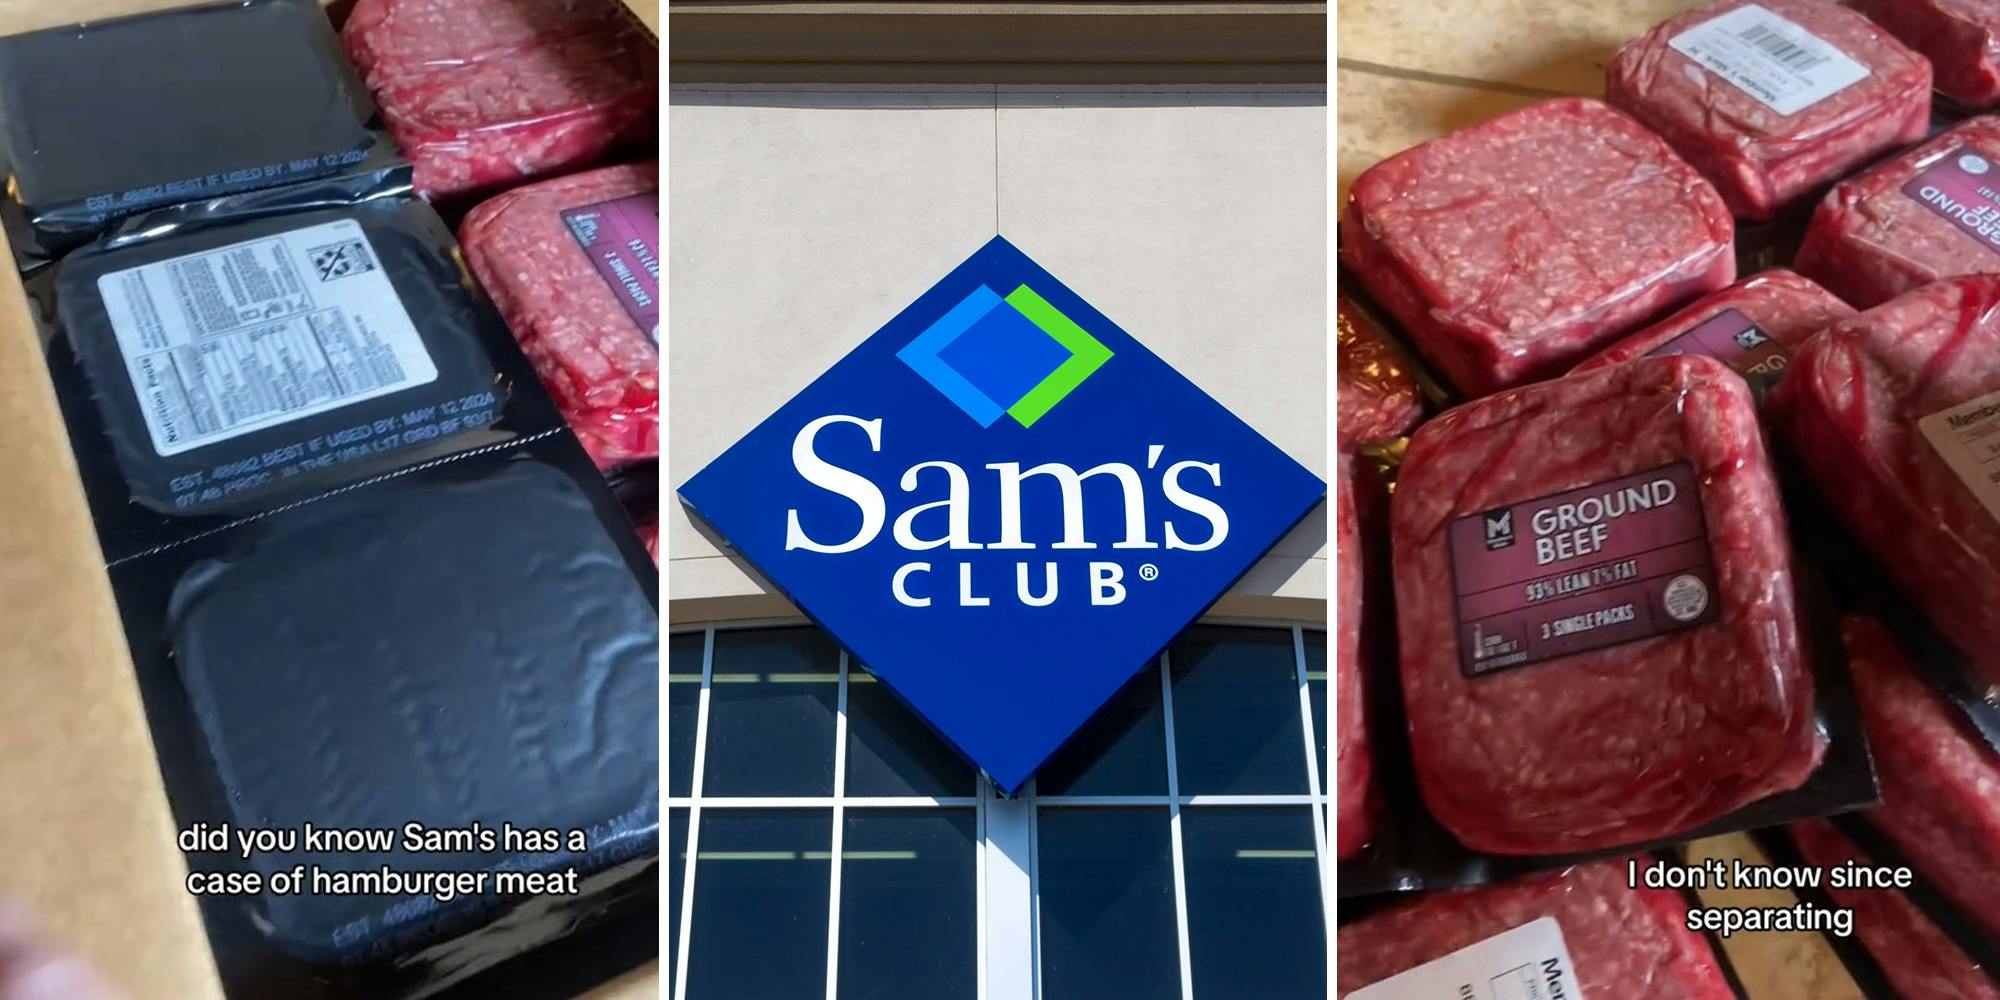 ‘That’s a savings of $72’: Sam’s Club customer buys case of hamburger meat, can’t believe how much it costs